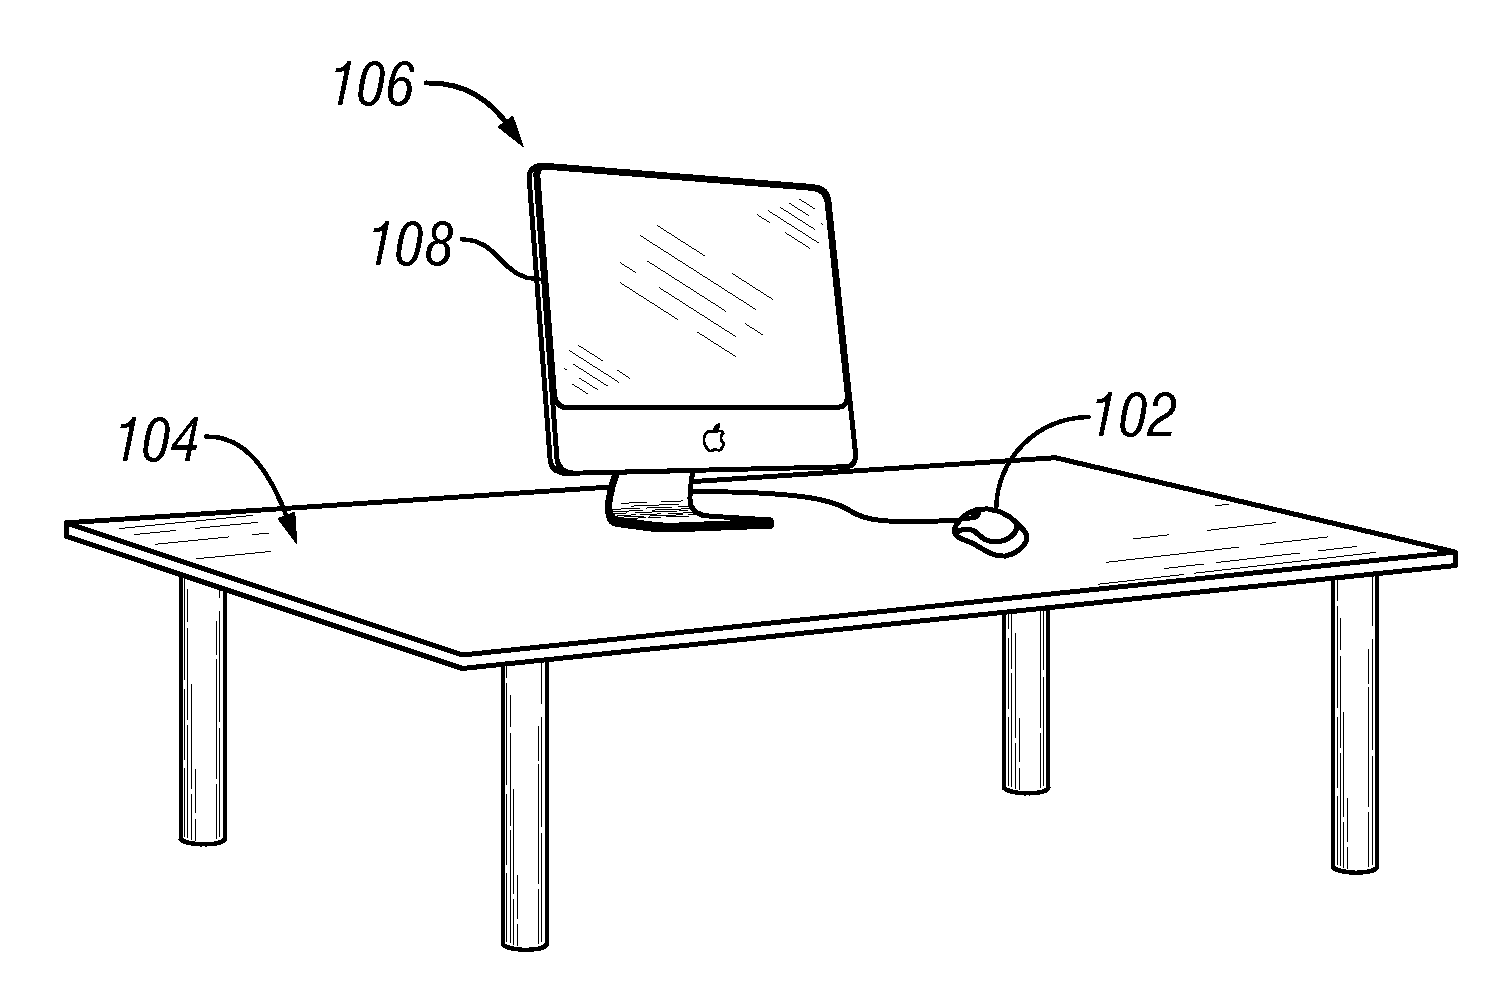 Using vibration to determine the motion of an input device